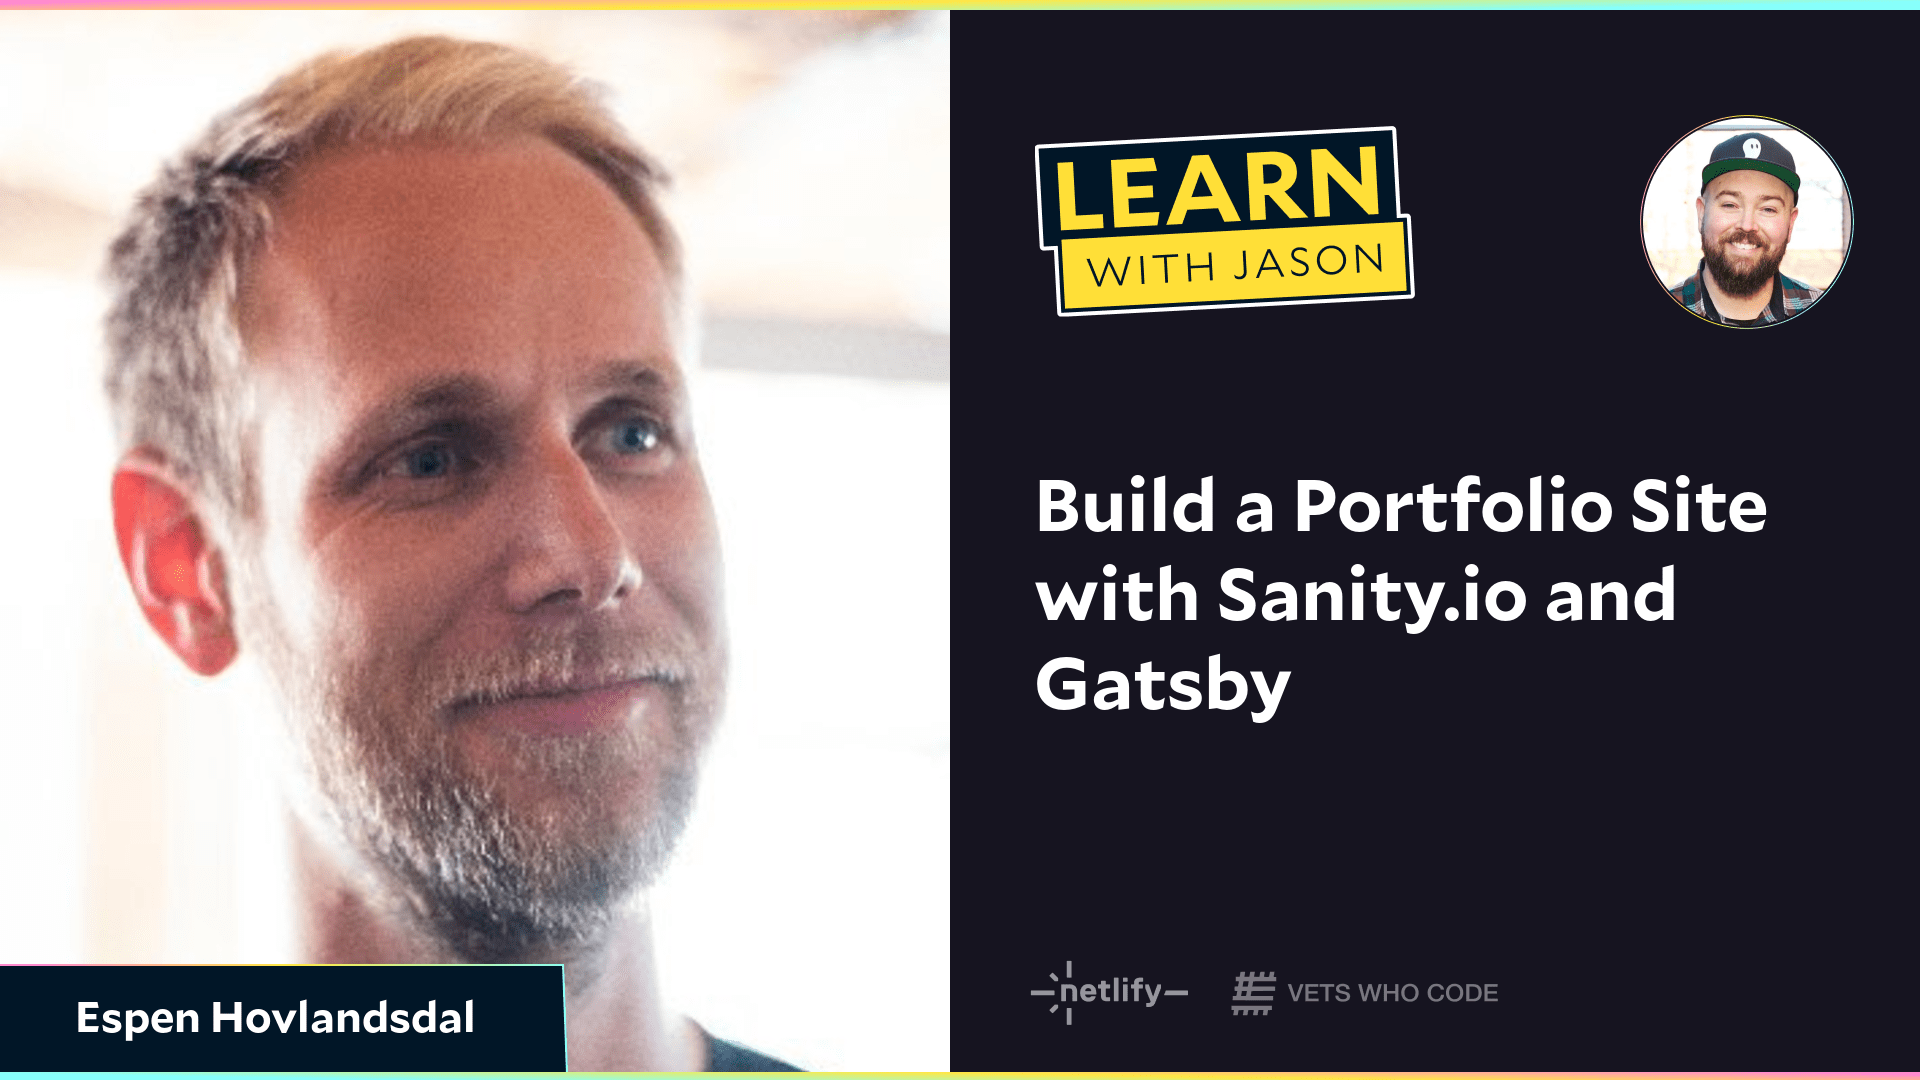 Build a Portfolio Site with Sanity.io and Gatsby (with Espen Hovlandsdal)